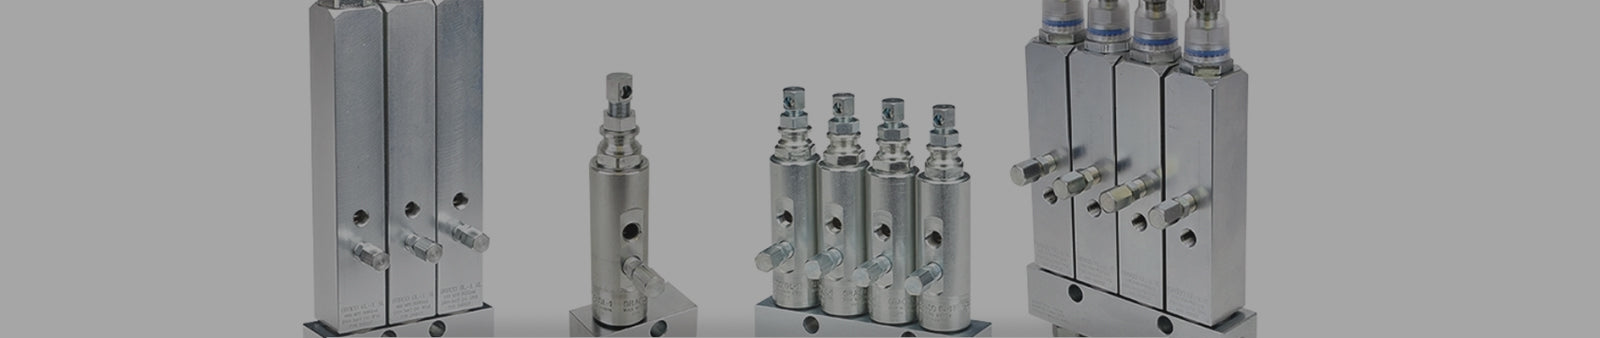 Graco Automatic Lubrication Injectors